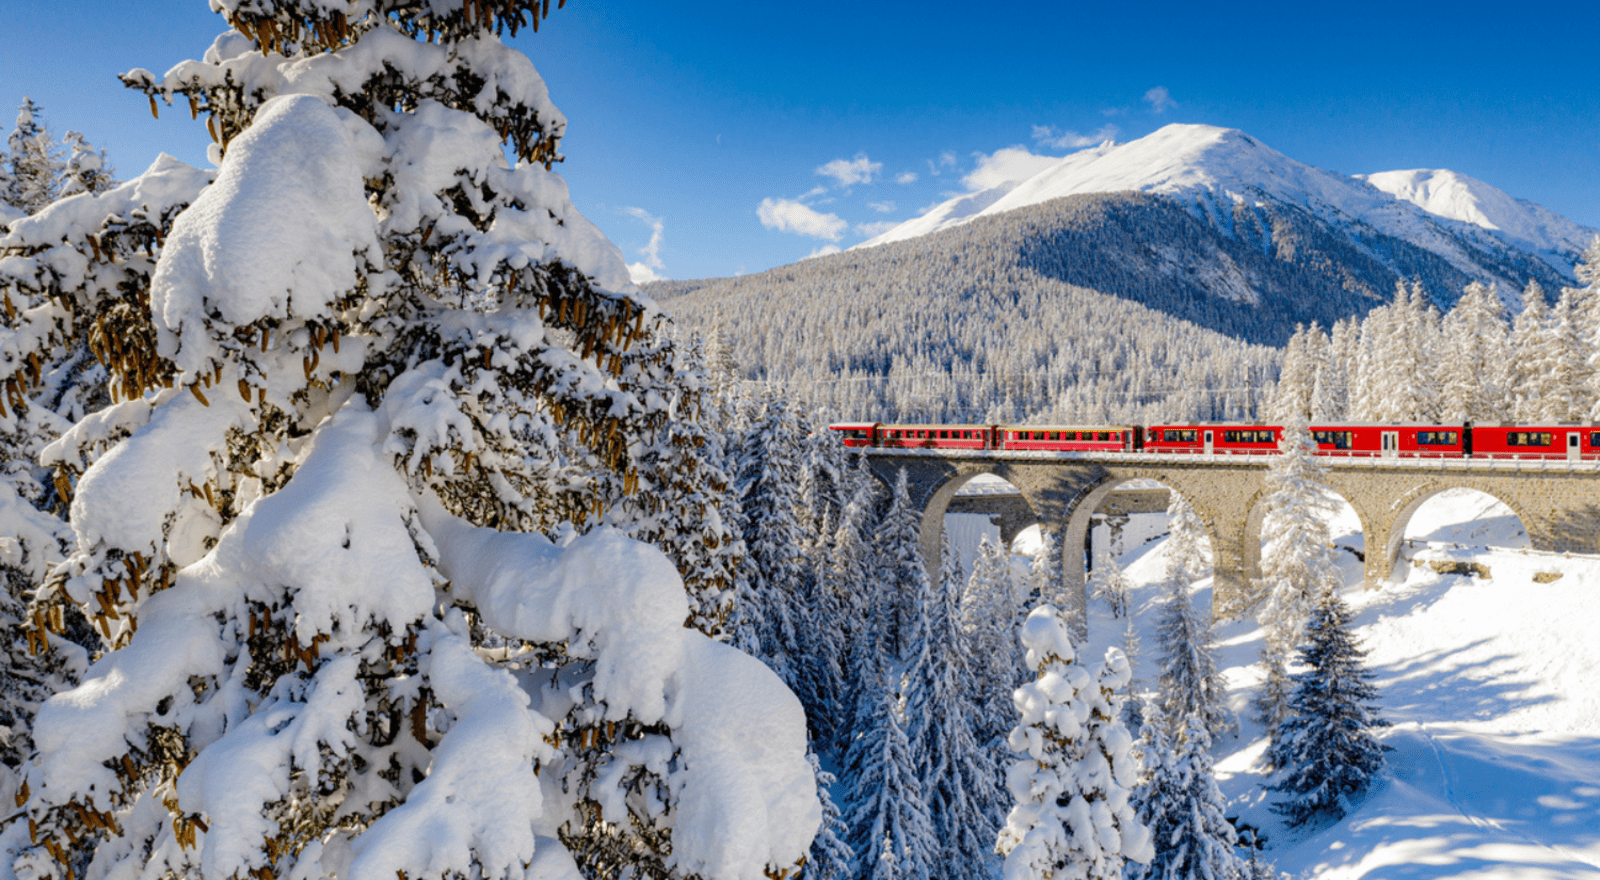 red train travelling through snowy mountains and trees